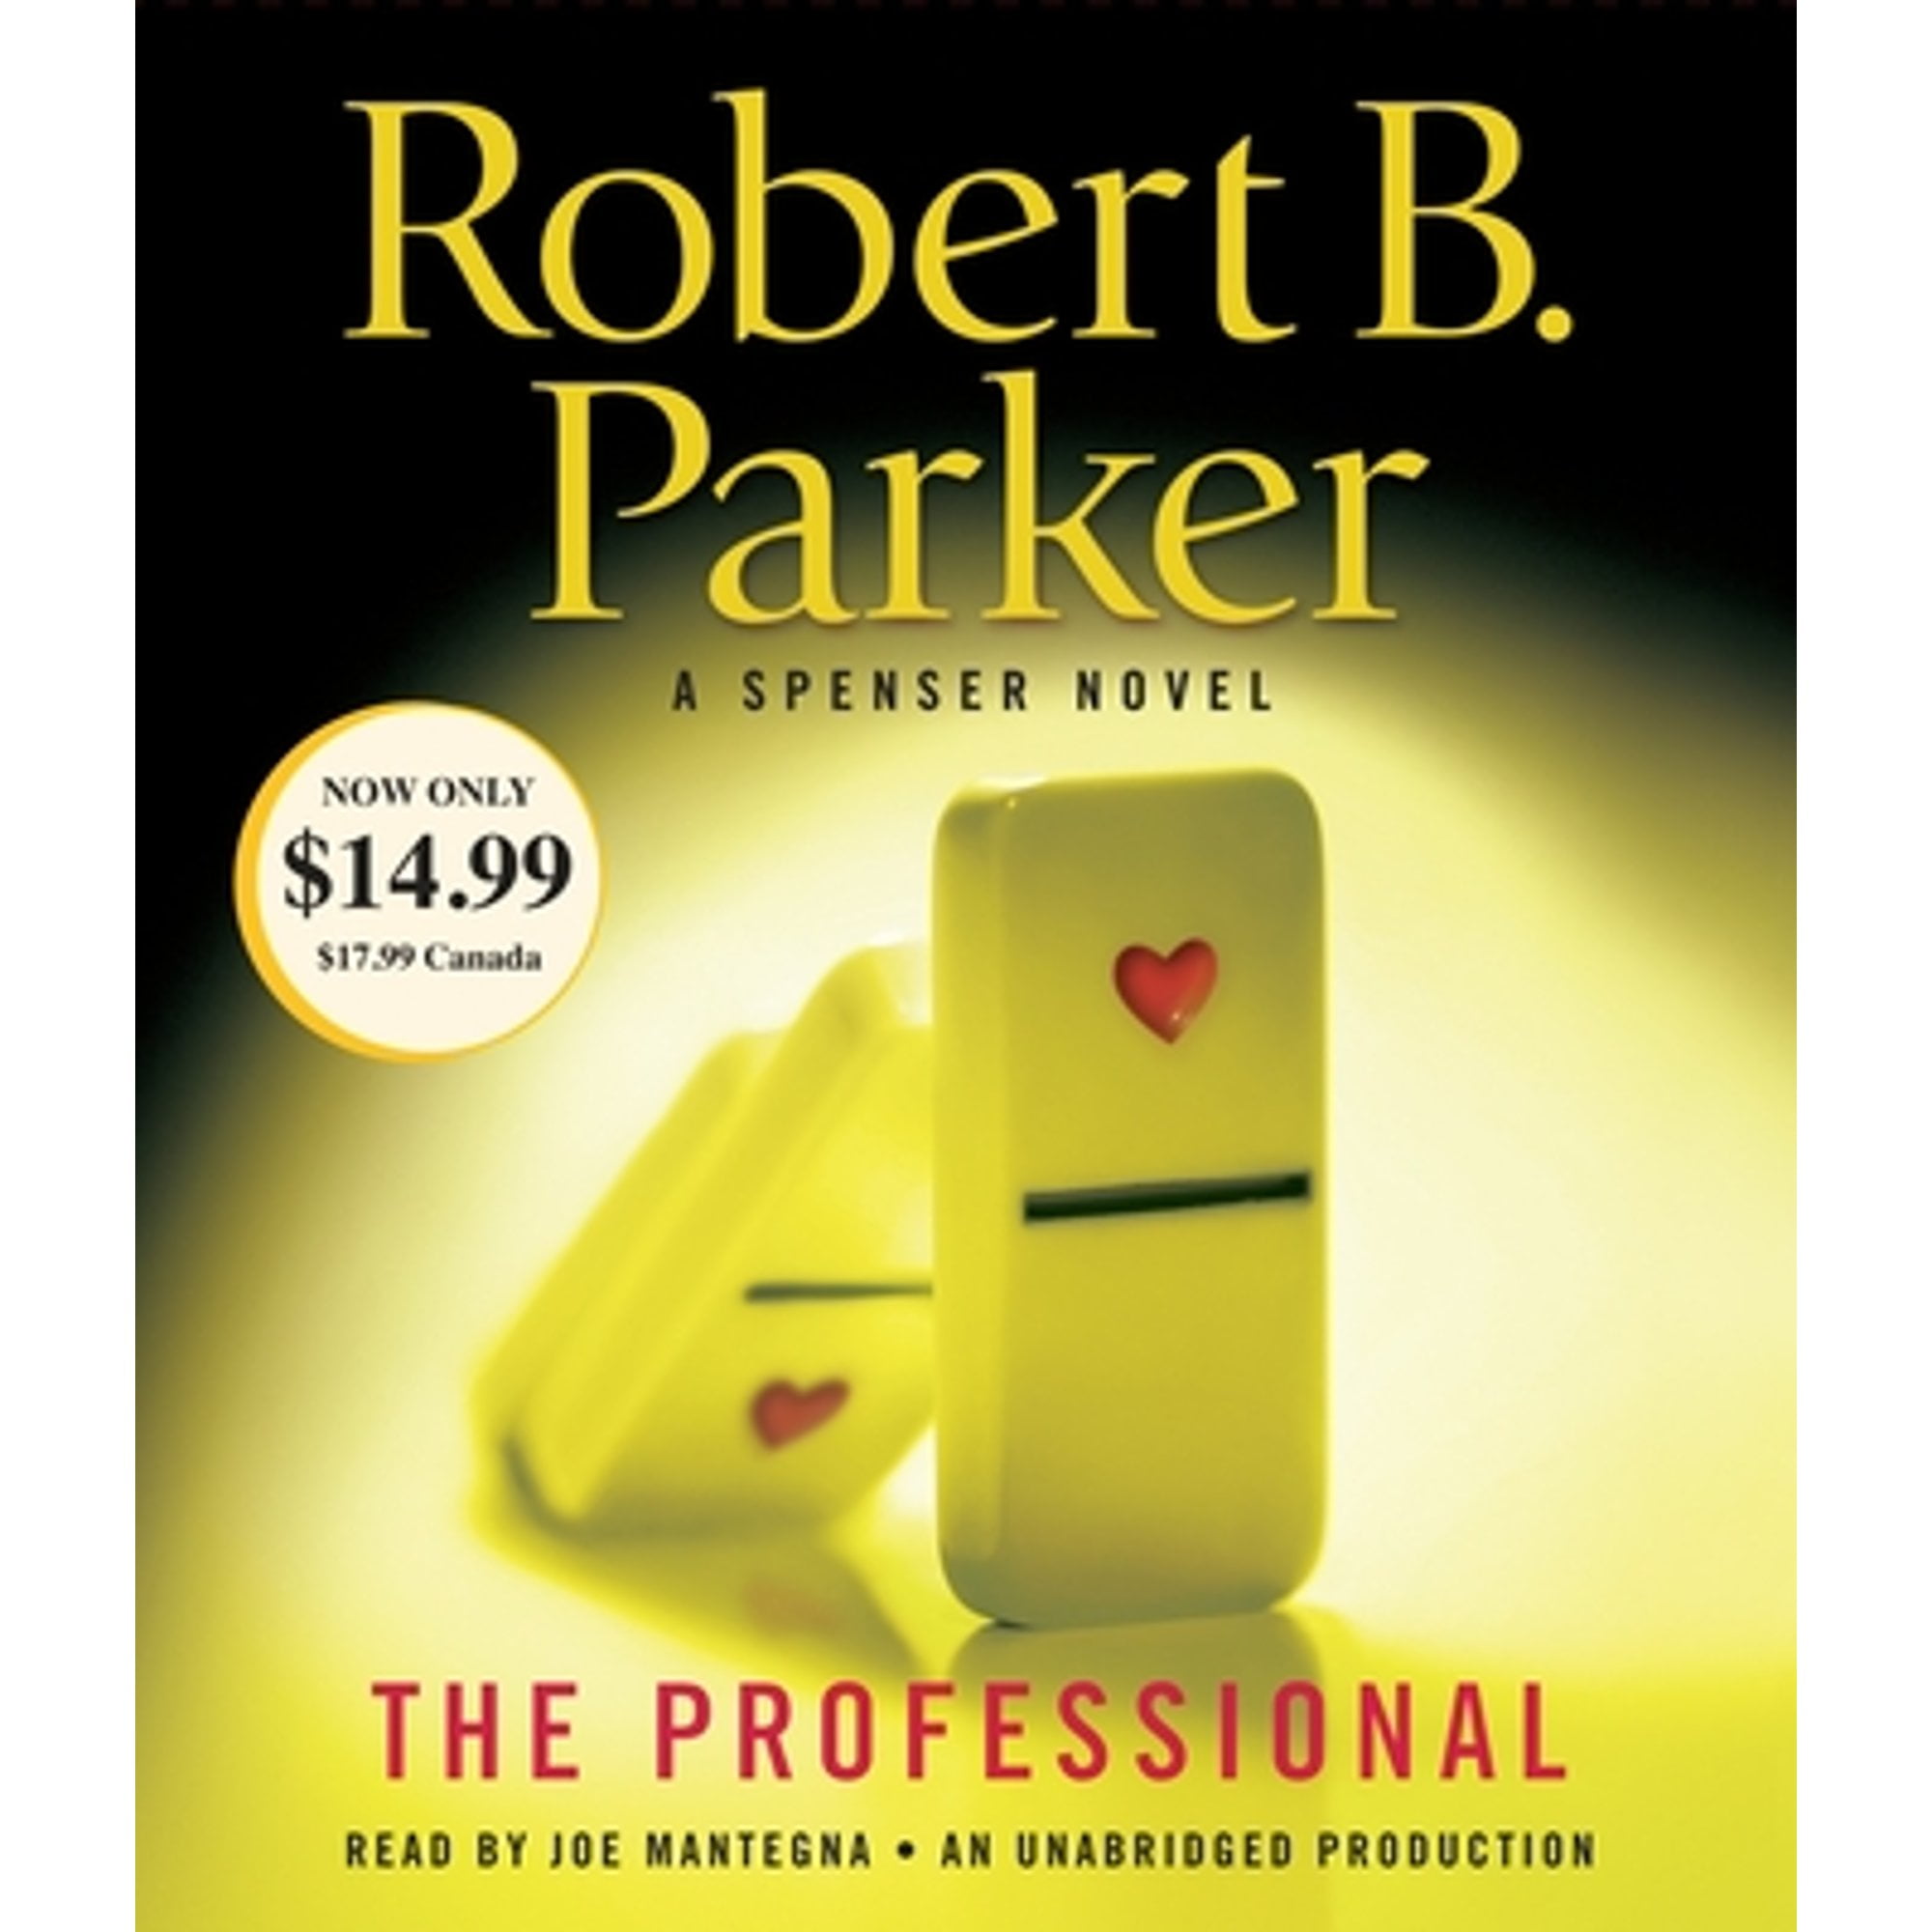 Pre-Owned The Professional (Audiobook 9780553545210) by Robert B Parker, Joe Mantegna